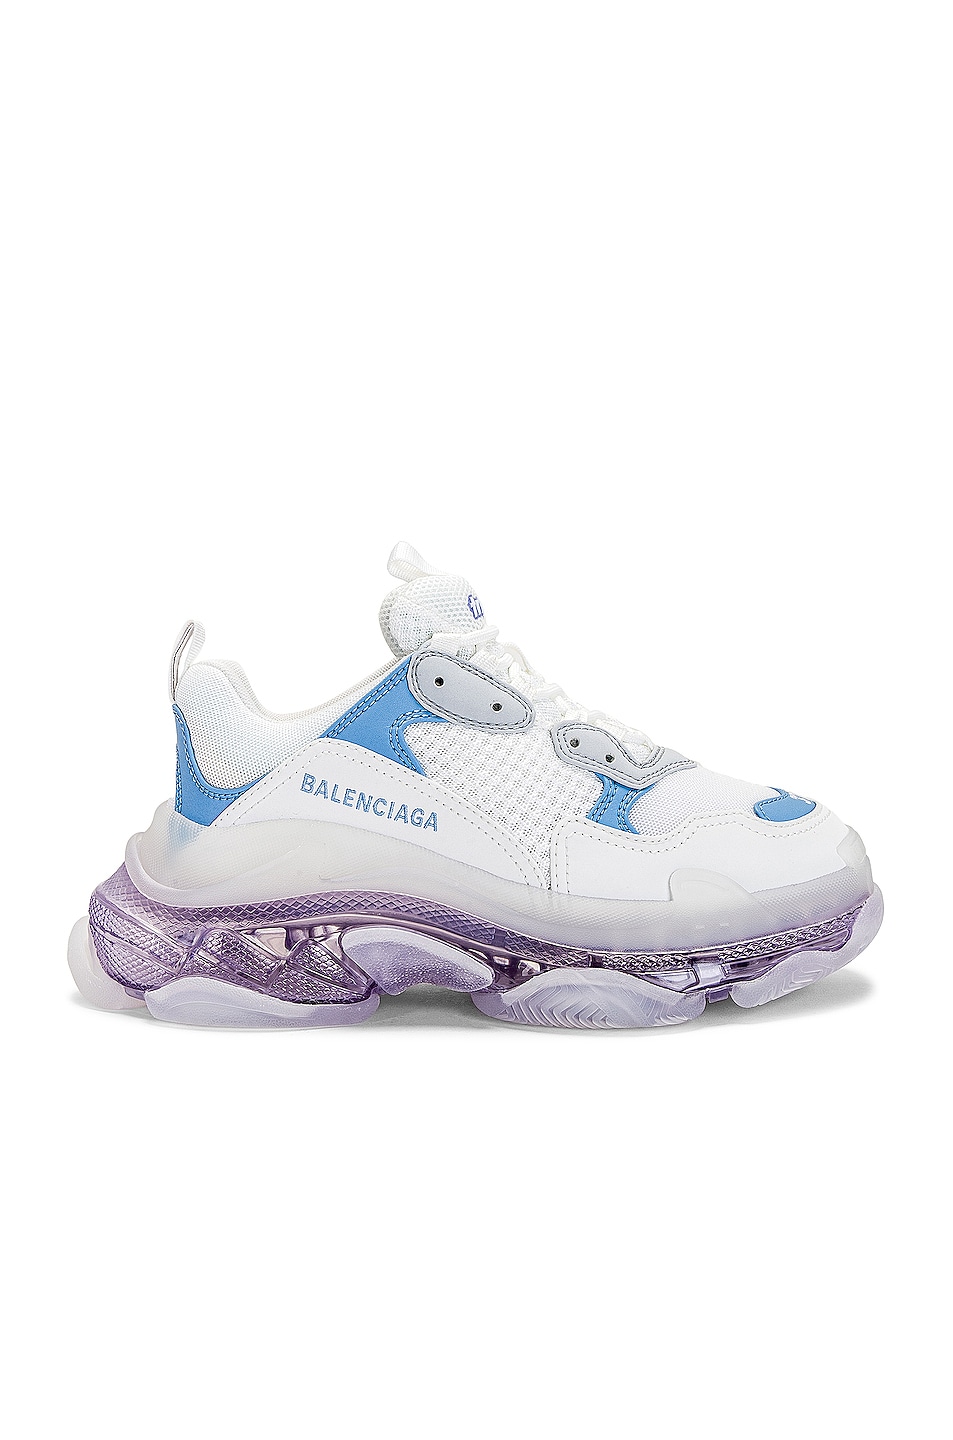 Image 1 of Balenciaga Triple S Clear Sole Sneaker in Light Blue, Grey, Lilac & White